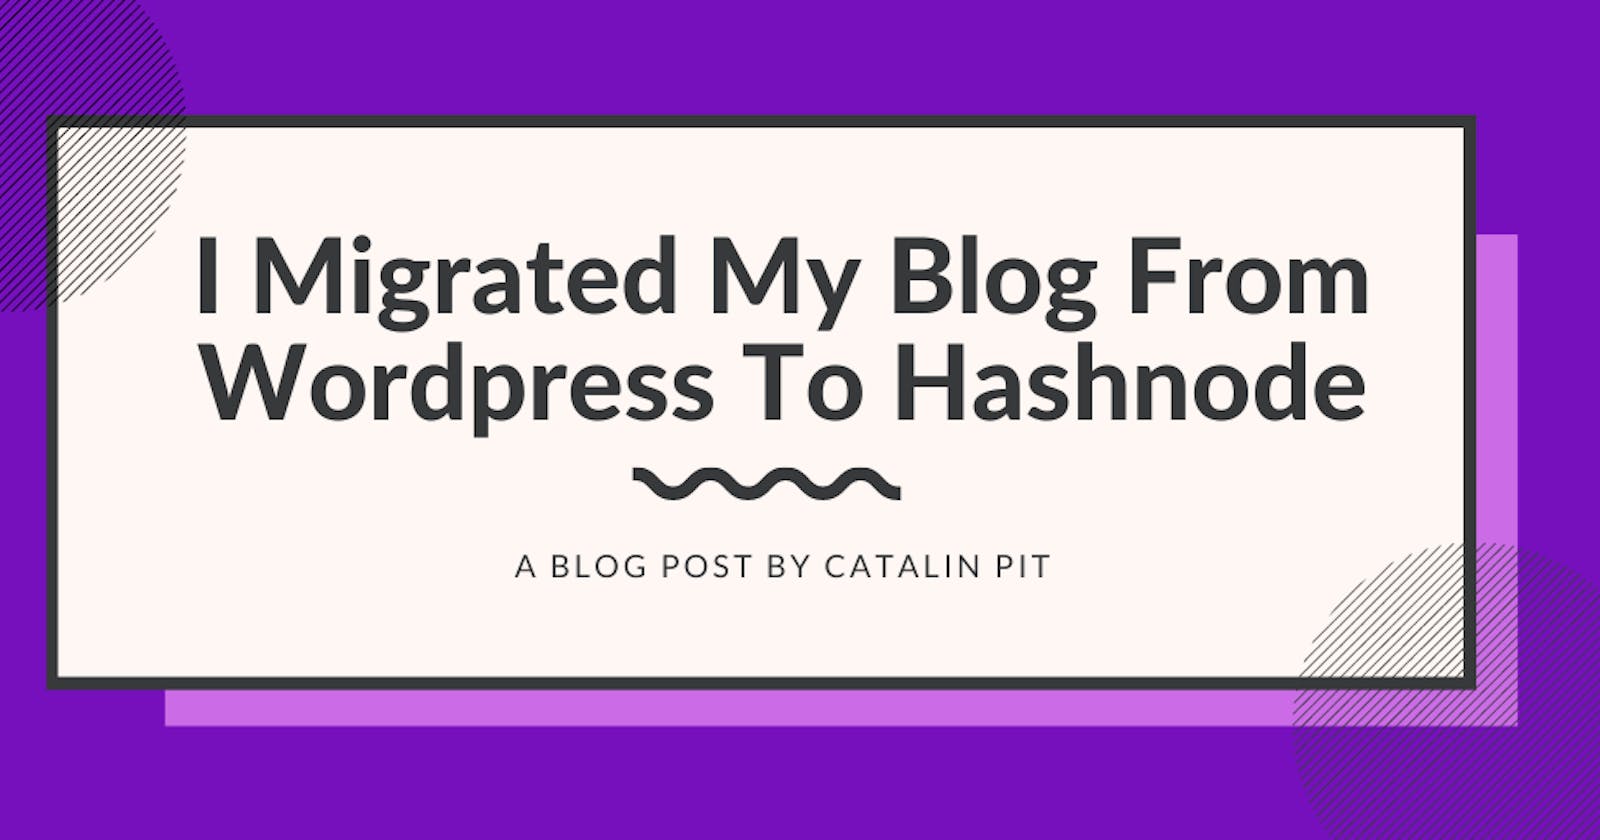 I Migrated My Blog From WordPress To Hashnode